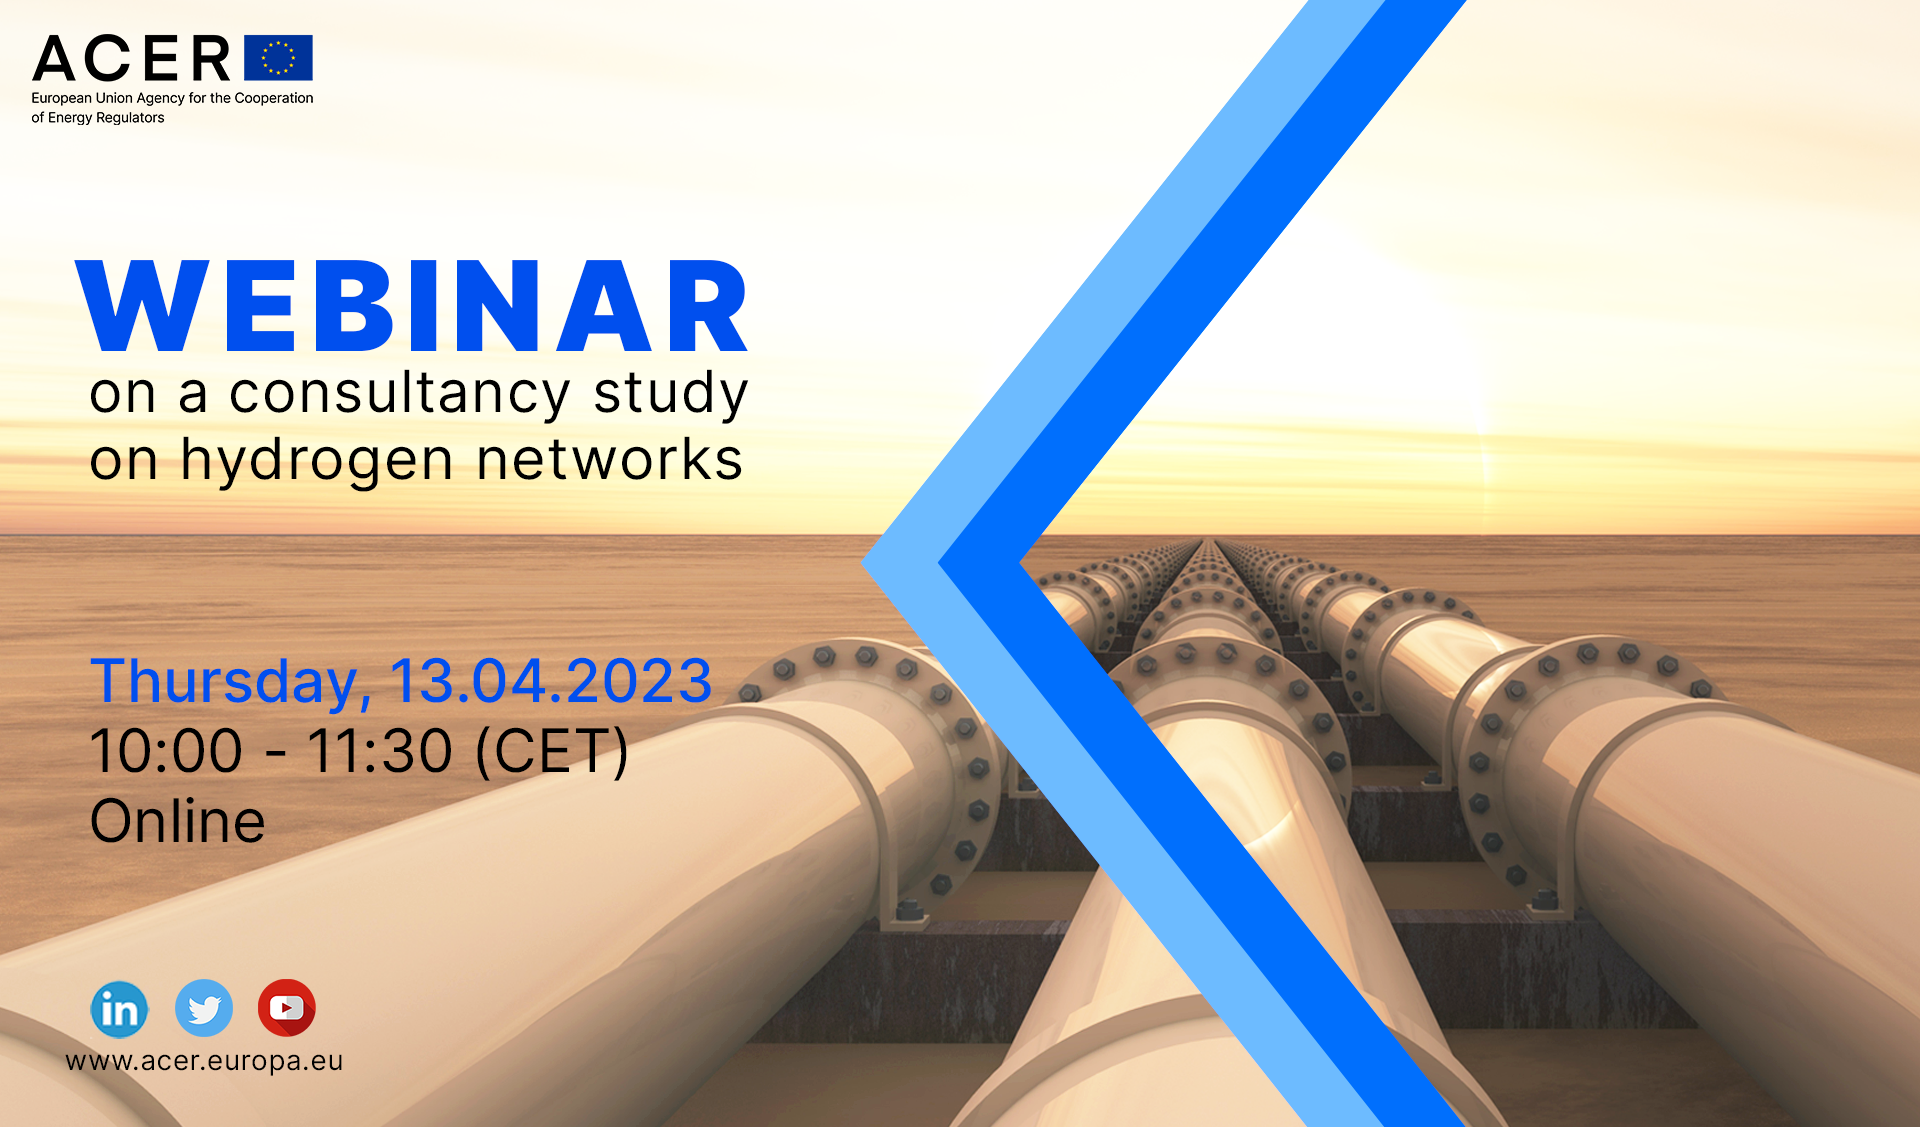 ACER webinar on a consultancy study on hydrogen networks